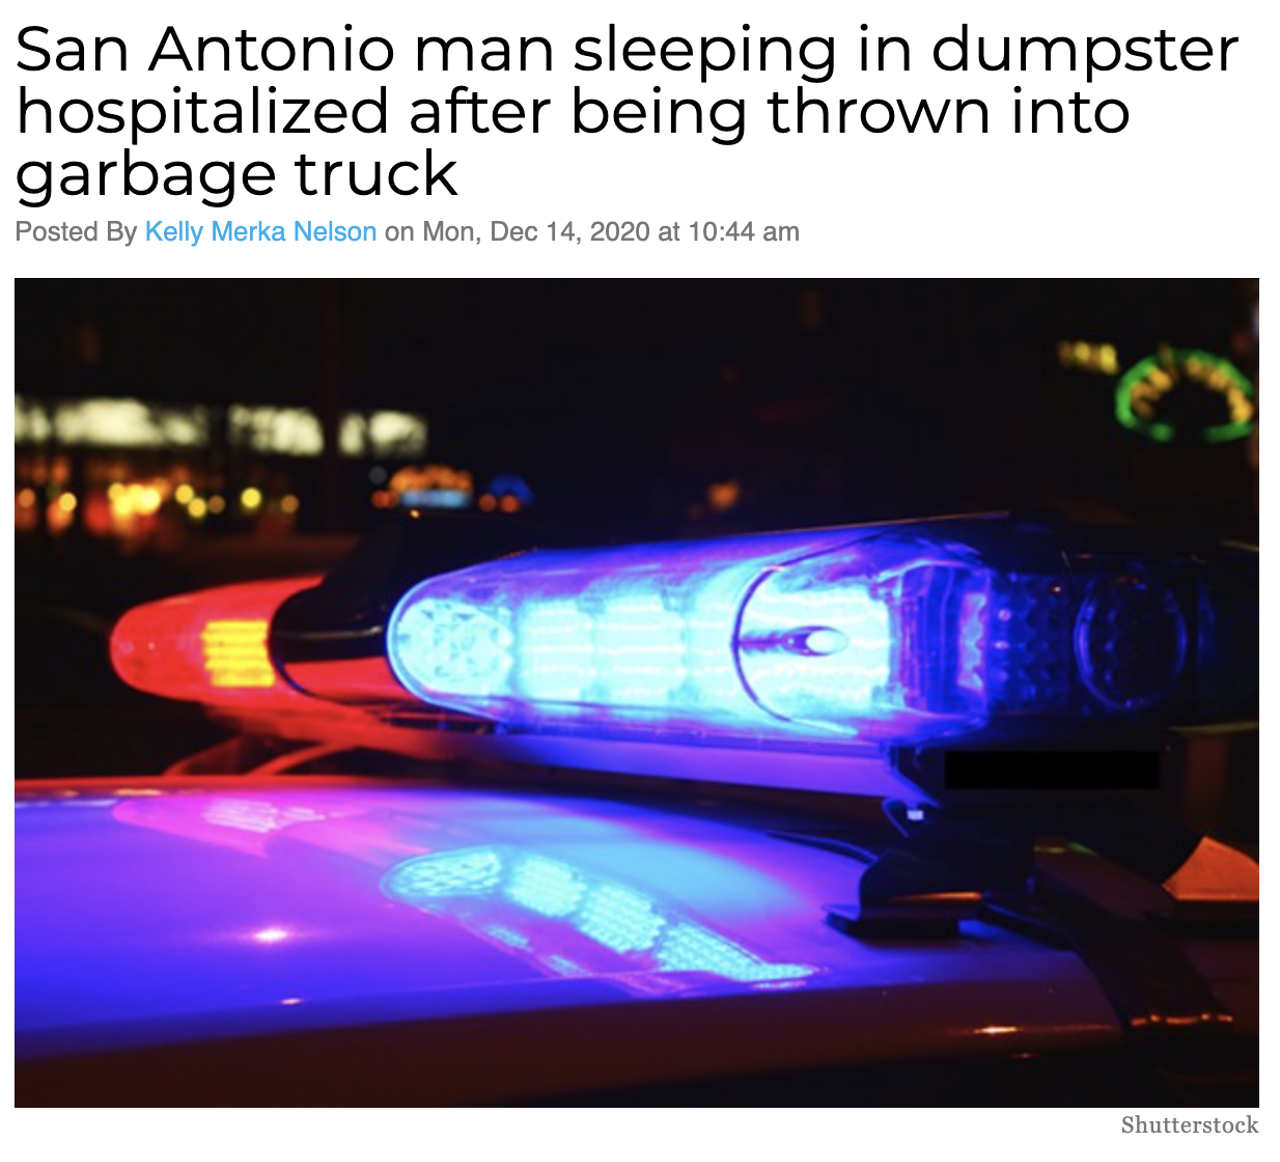 A San Antonio man who was sleeping in a dumpster has been hospitalized with minor injuries after getting picked up by a garbage truck. Read more here.